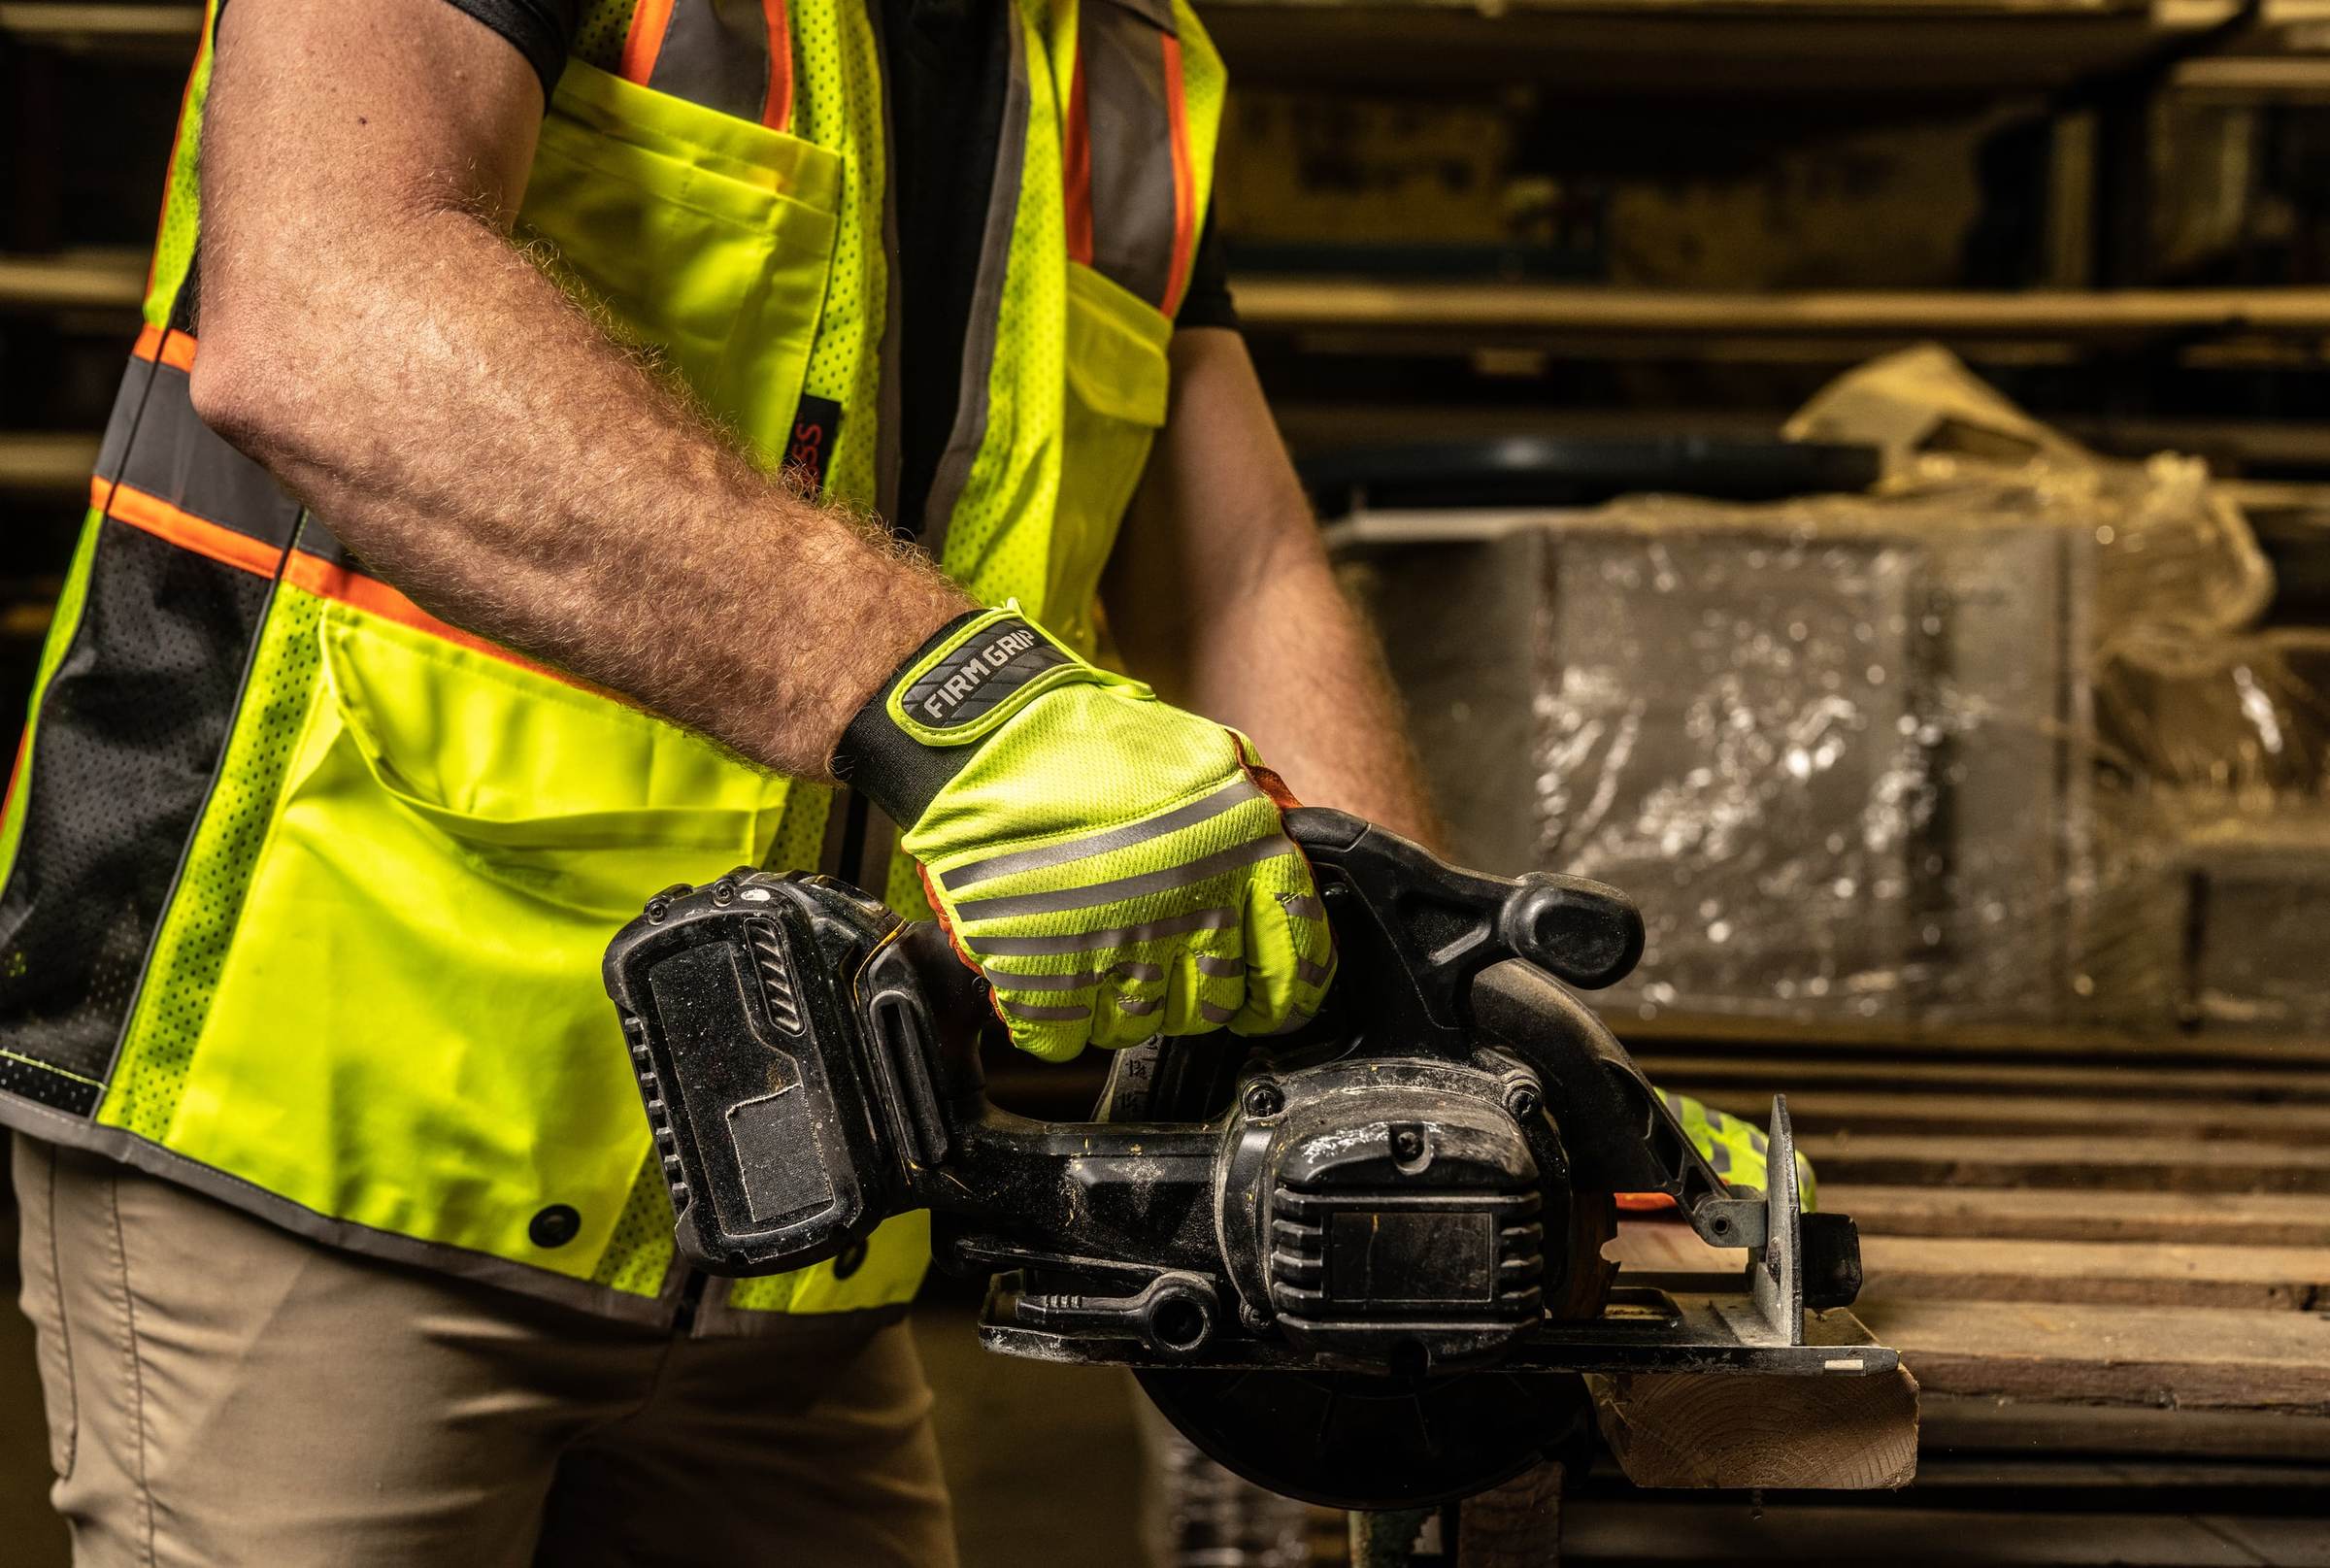 Firm Grip Impact Gloves - Tools In Action - Power Tool Reviews